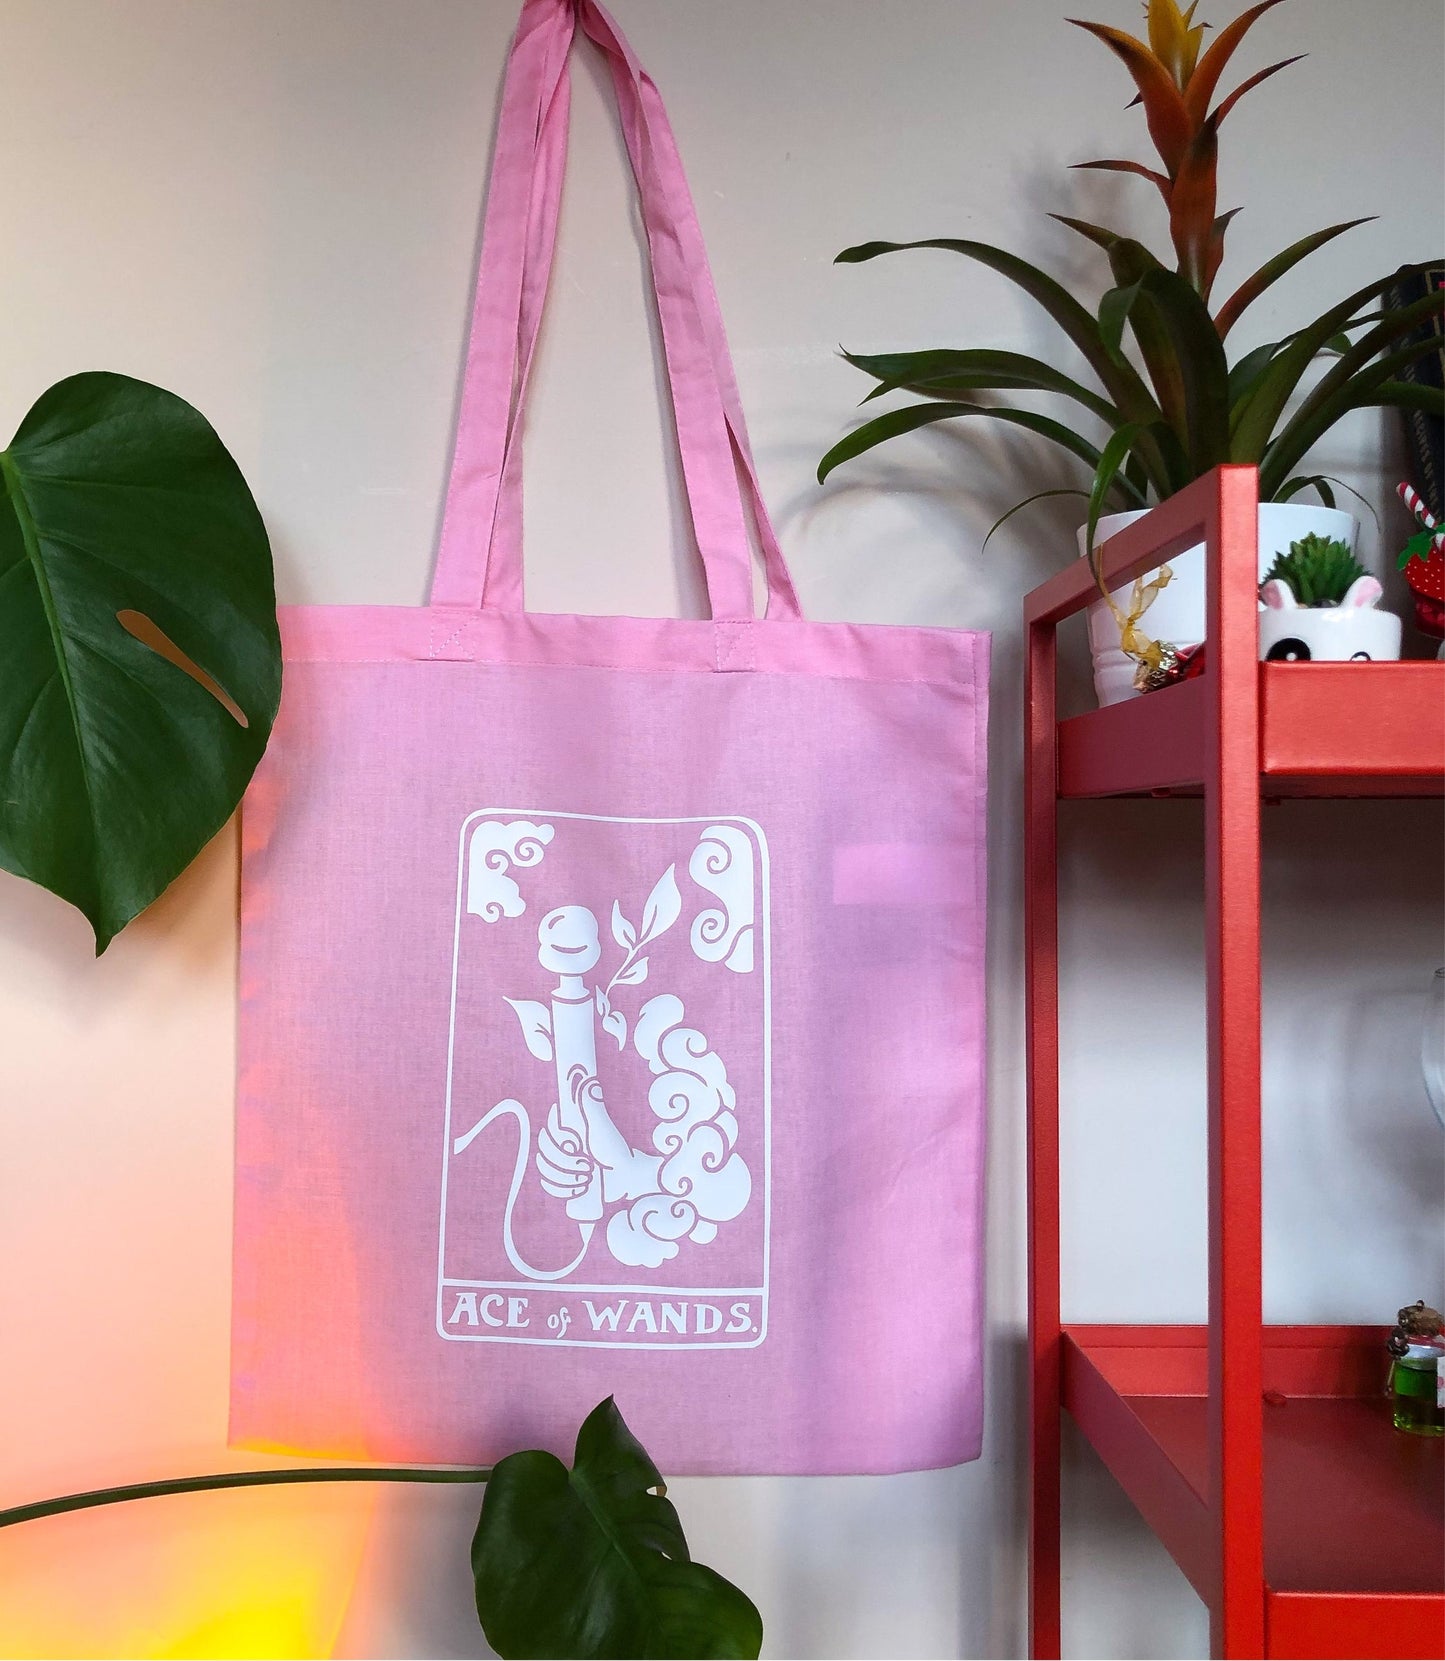 Pink tarot card tote bag with a white design. Original design based on Ace of Wands tarot card. A hand is coming out a cloud and holding a vibrator with the text ACE OF WANDS beneath